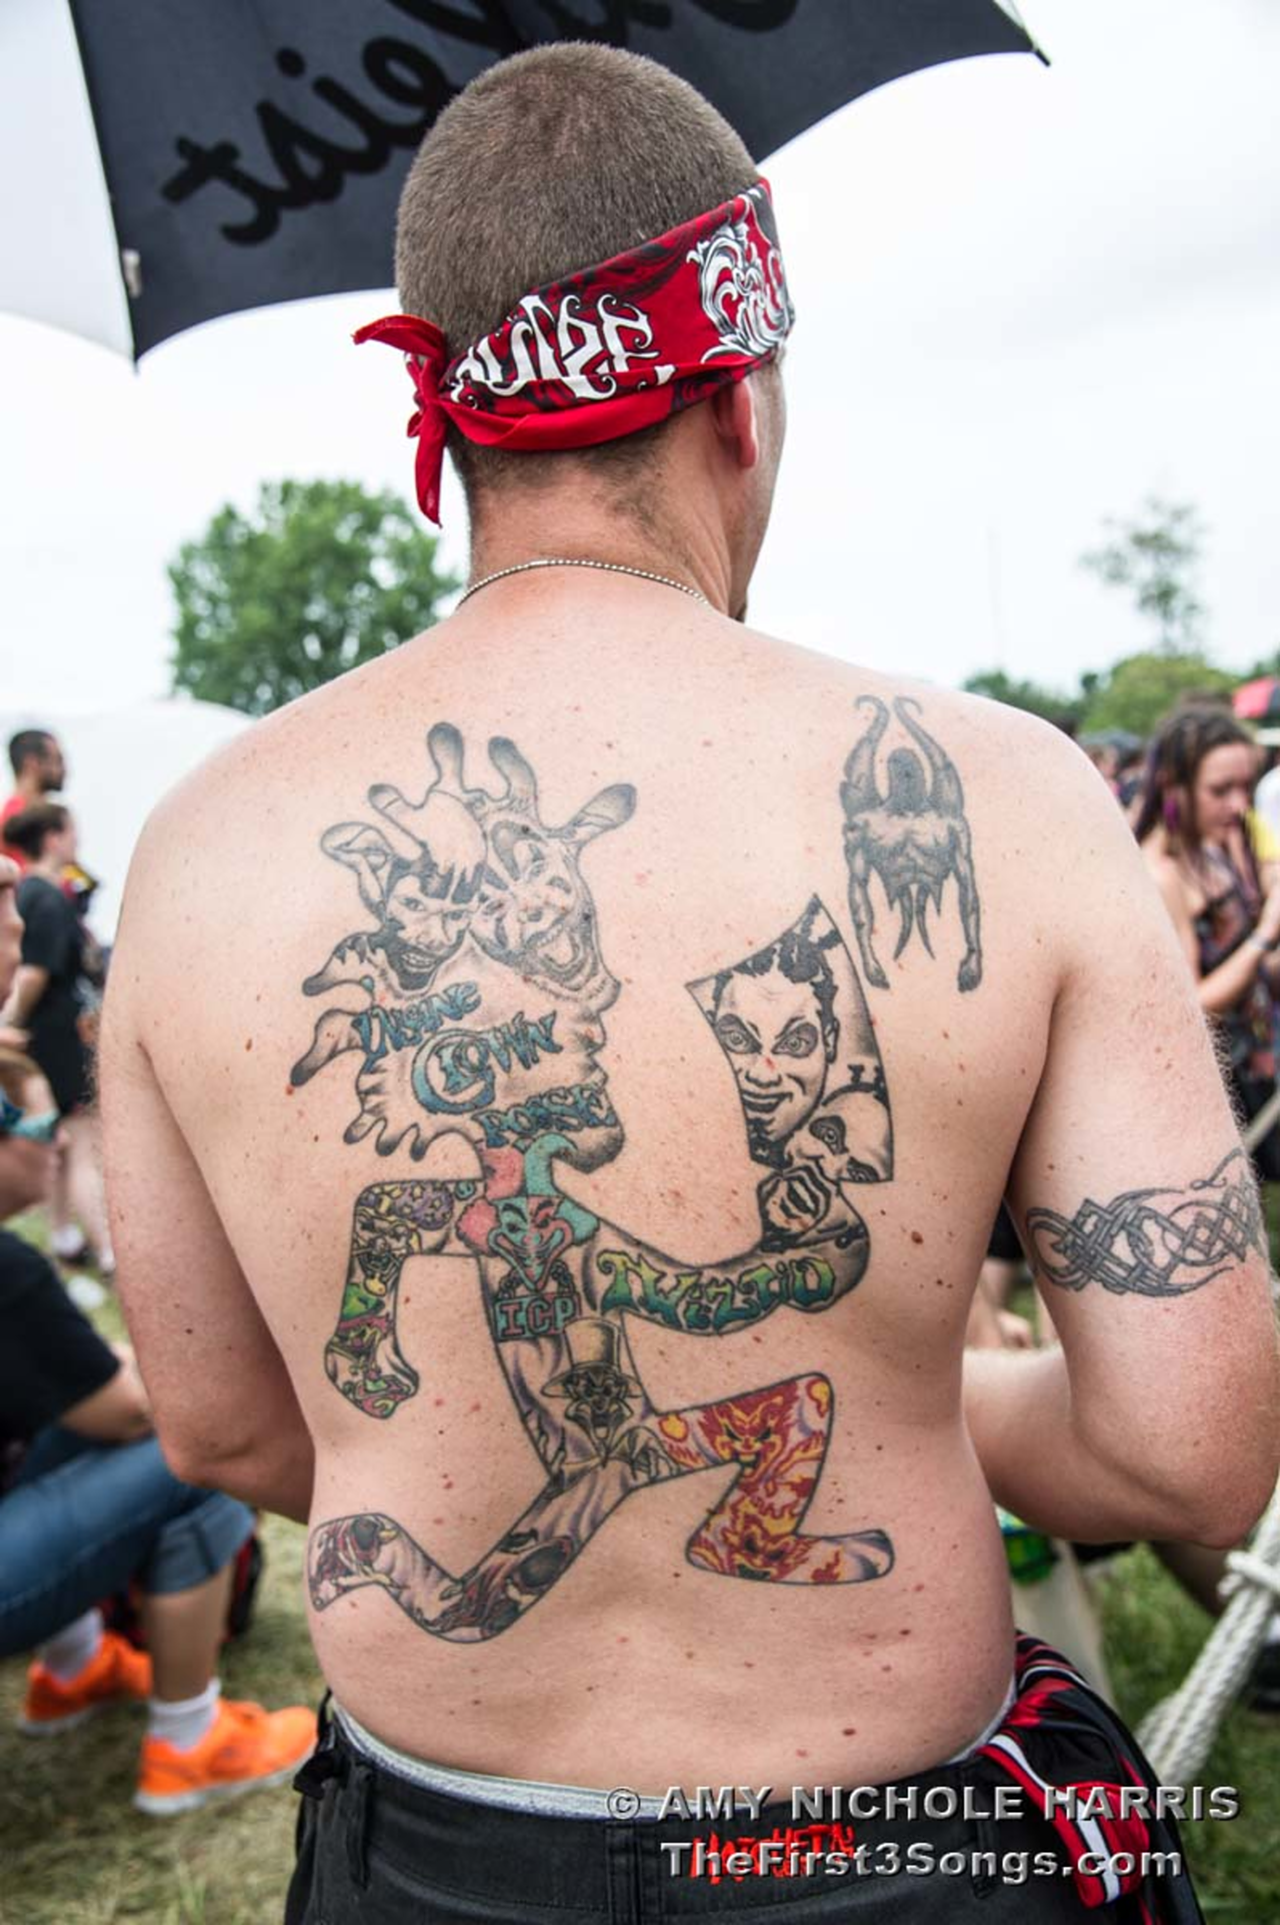 The Gathering of the Juggalos 2014